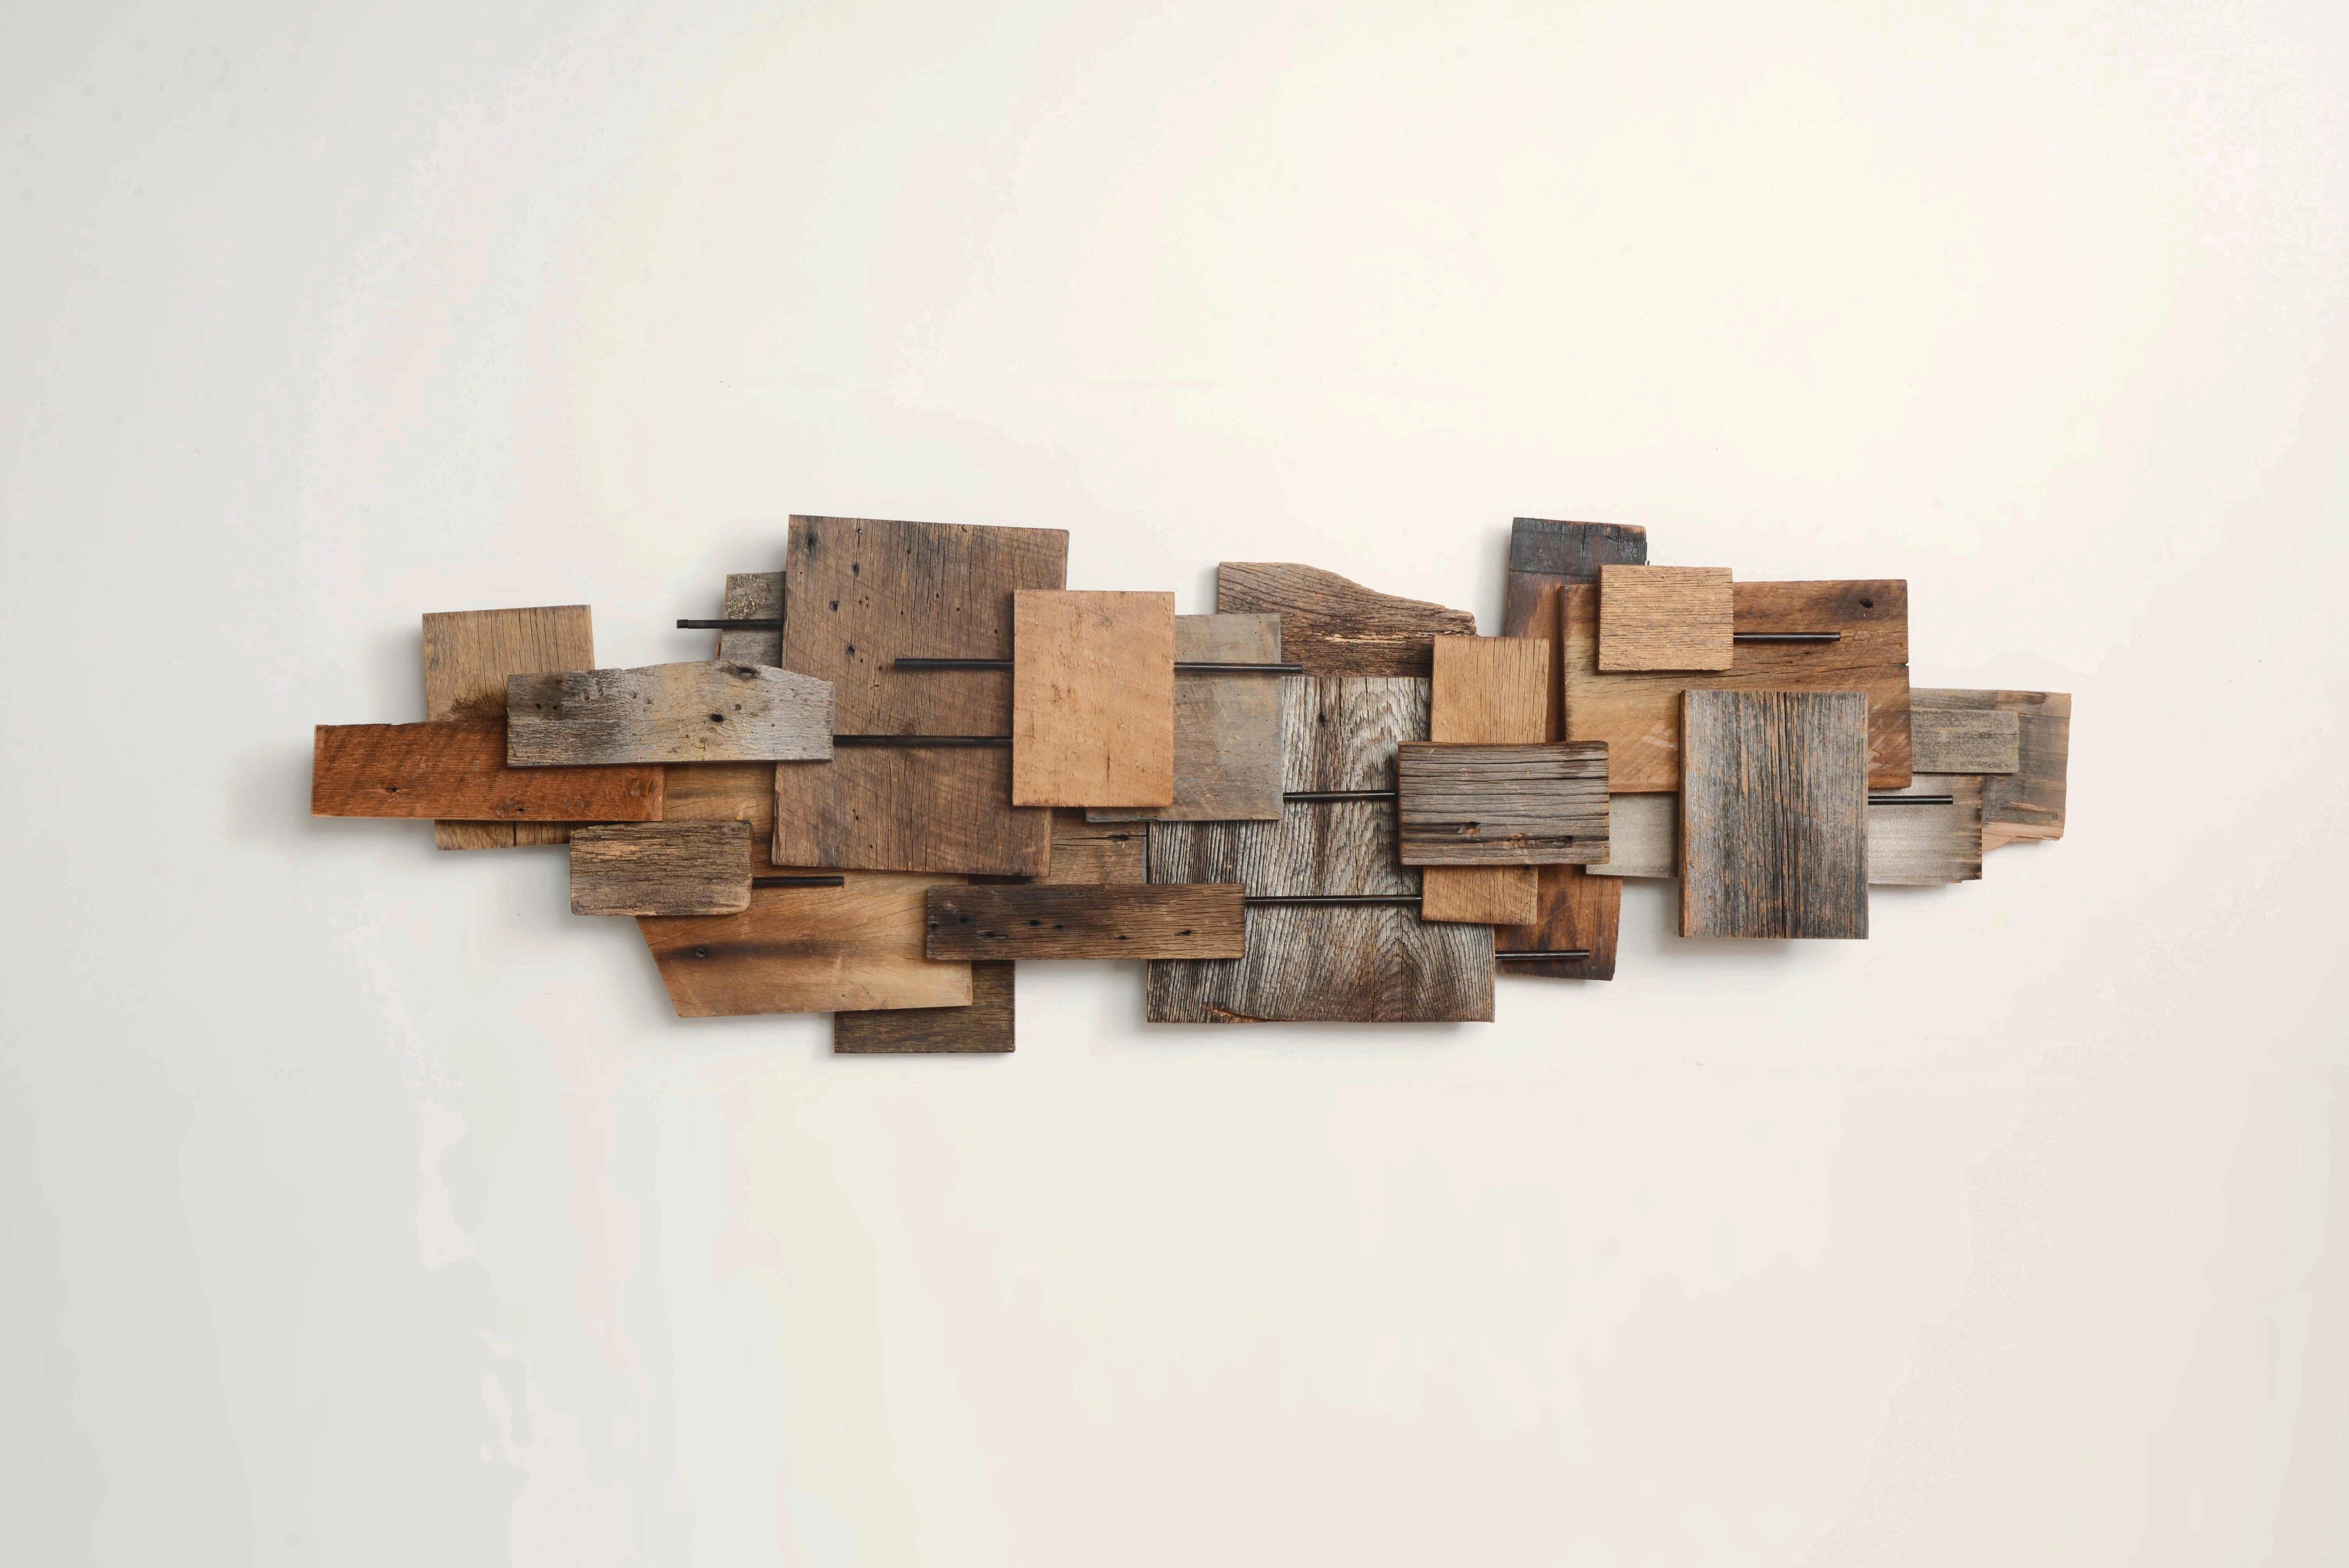 Koji Takei Abstract Sculpture - Wood panels with Dowels